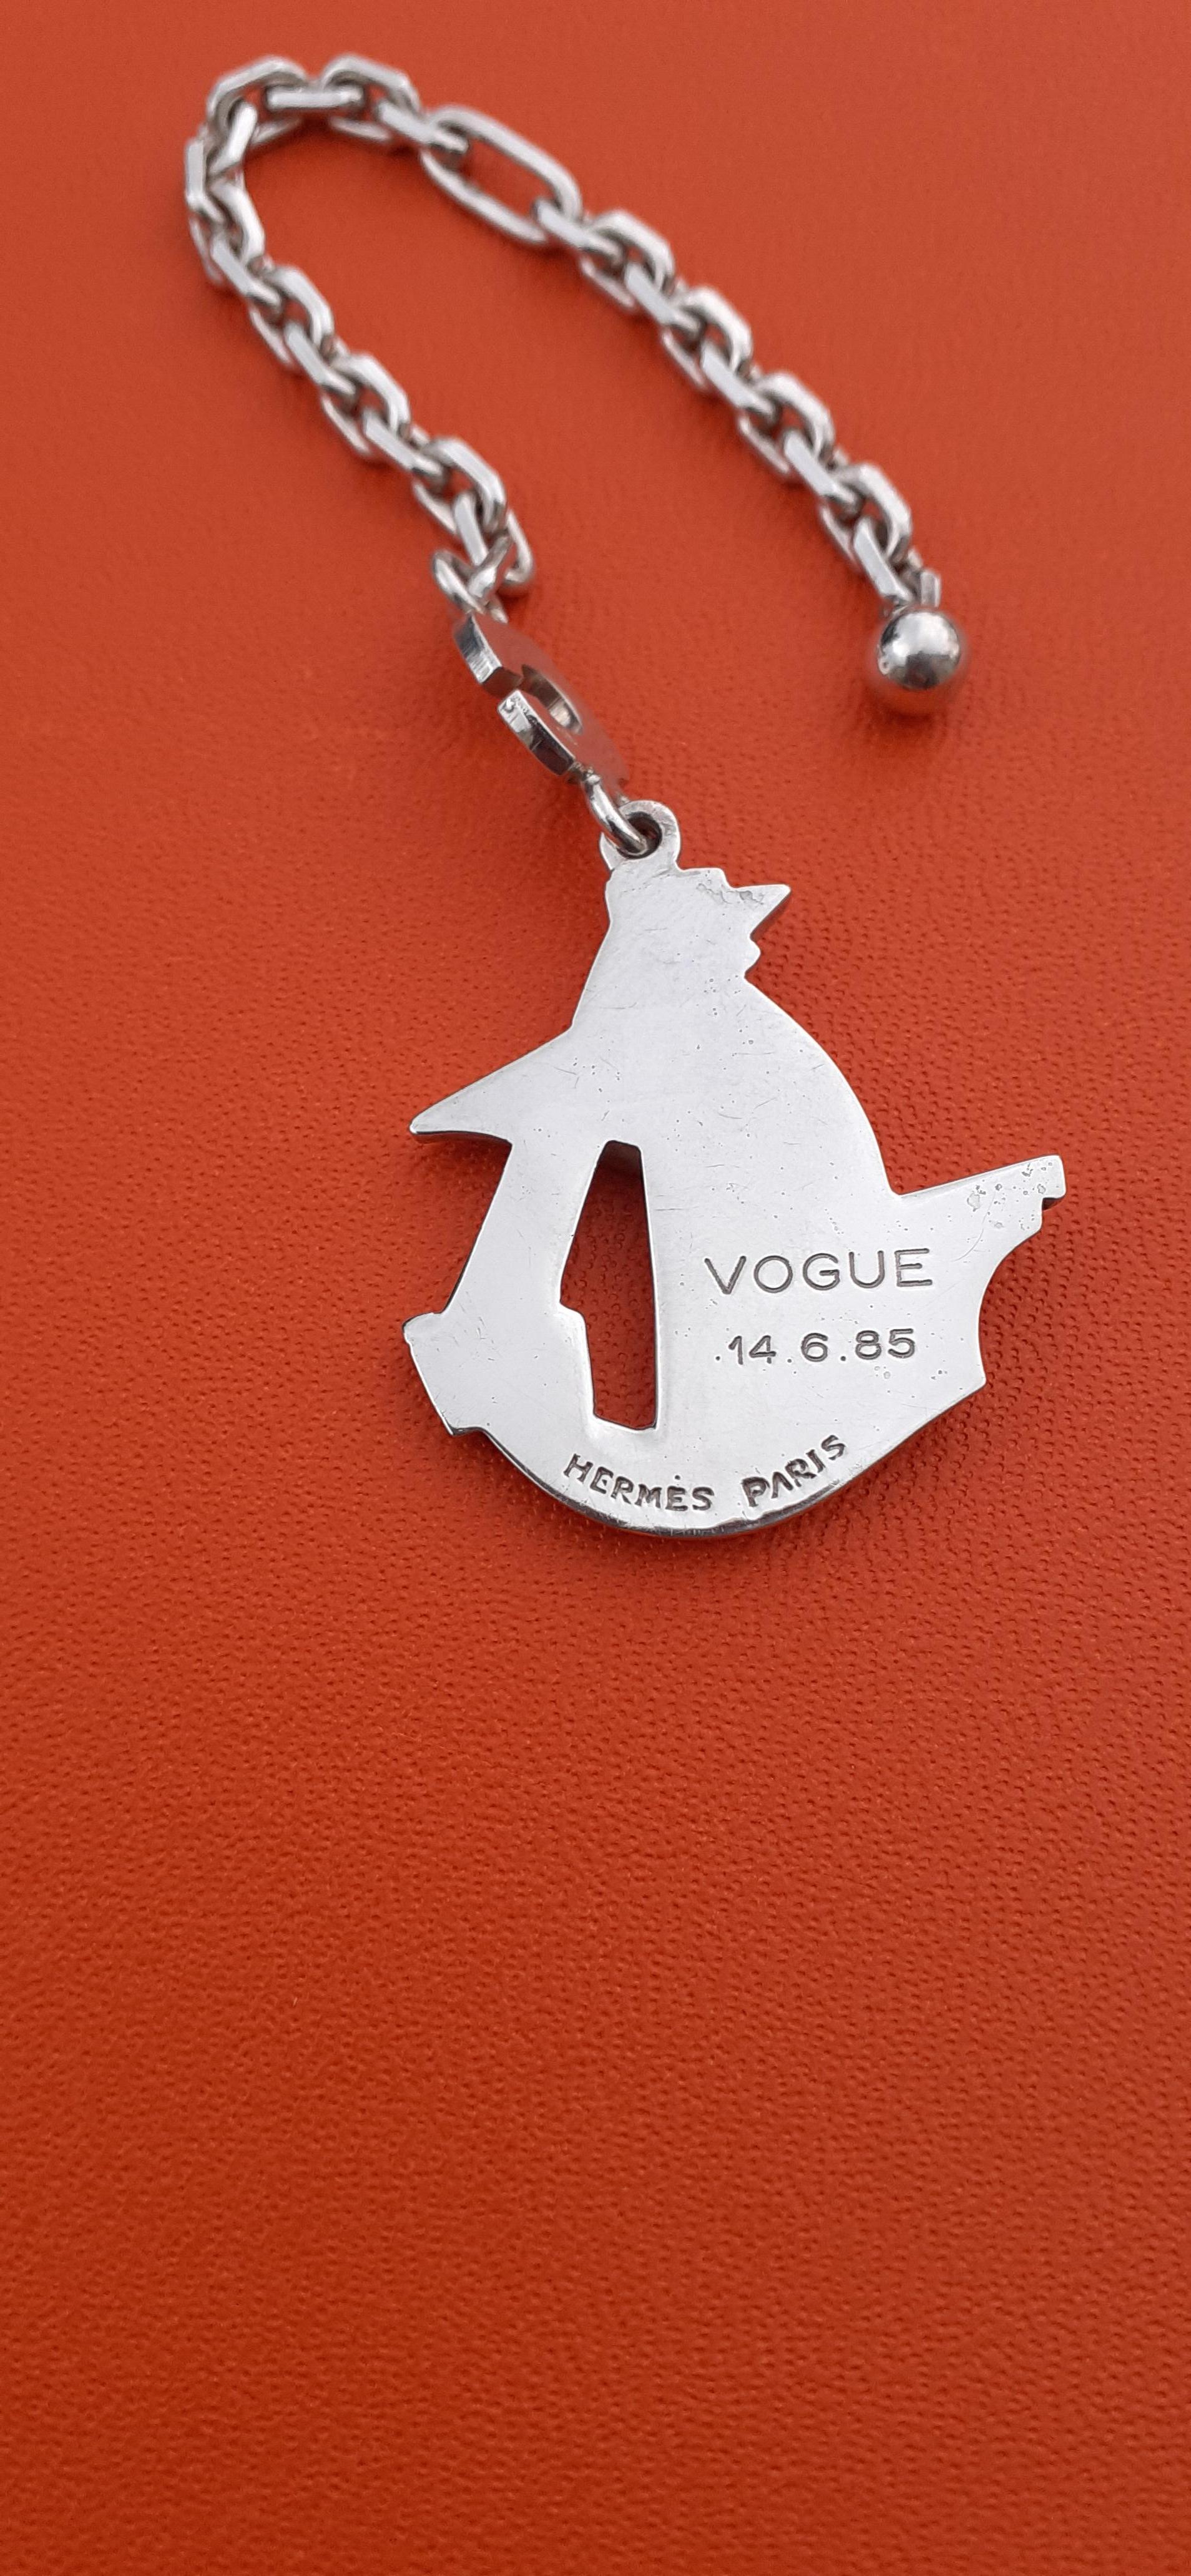 Women's or Men's Exceptional Hermès Keychain Boat in Silver for Vogue Magazine 1985 For Sale